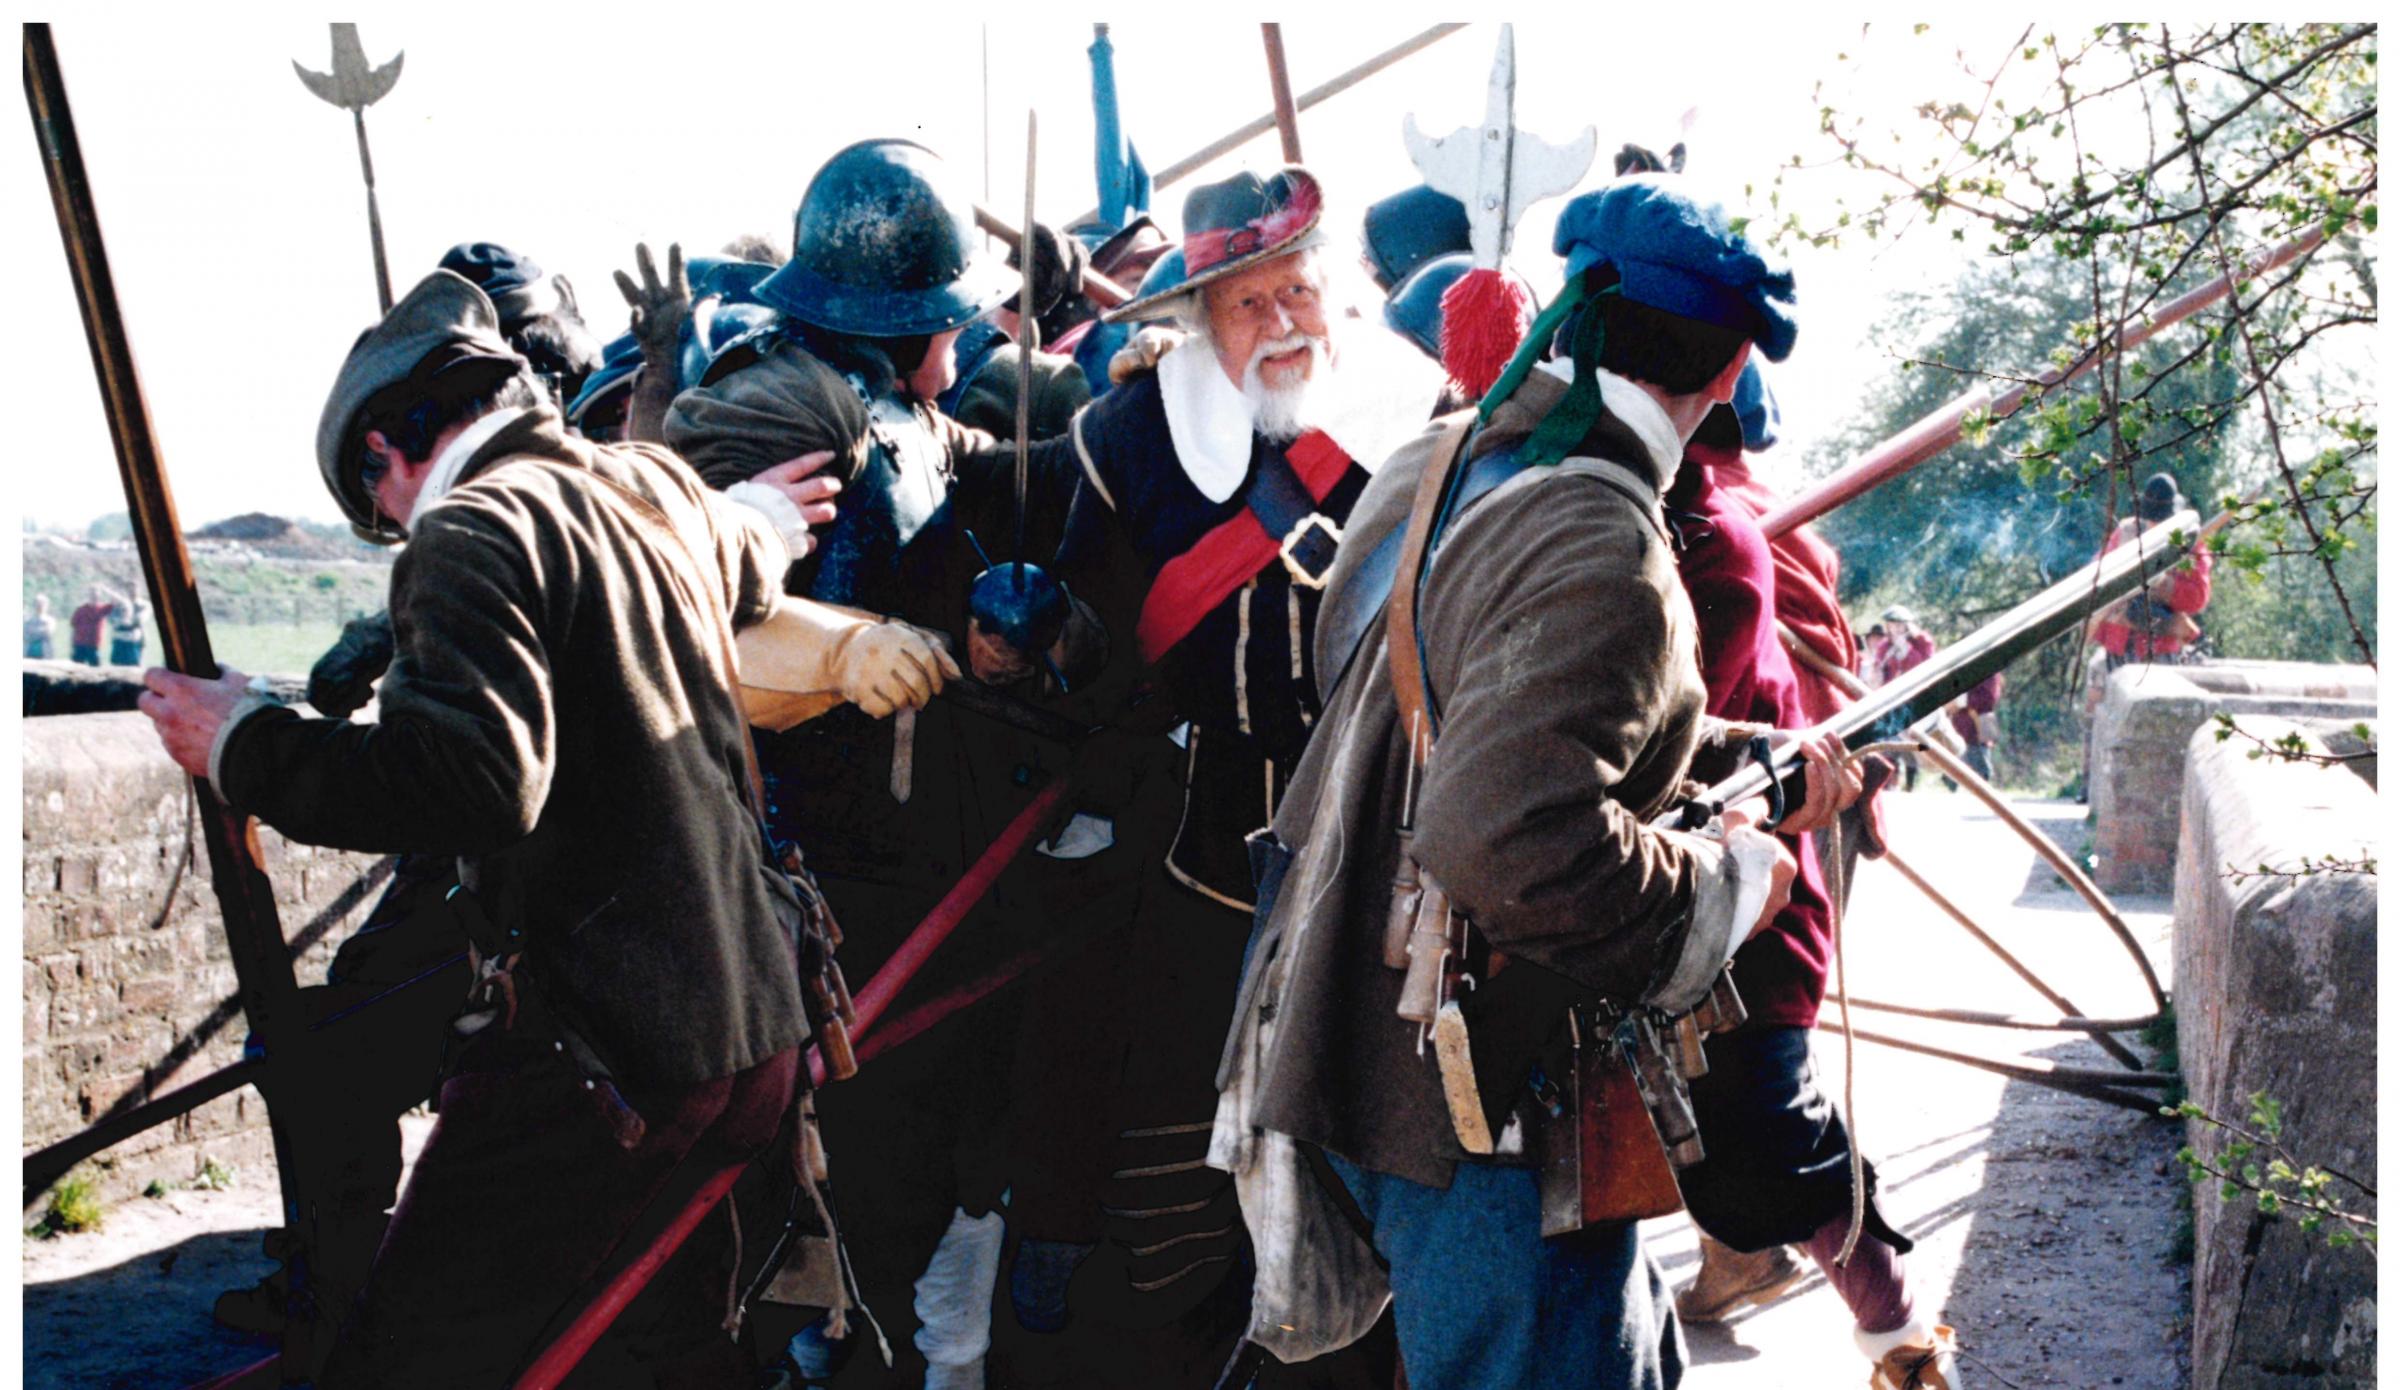 September 1992 saw the 350th anniversary of the Battle of Powick celebrated with re-enactors from the Sealed Knot, the English Civil War Society and the Worcester Militia